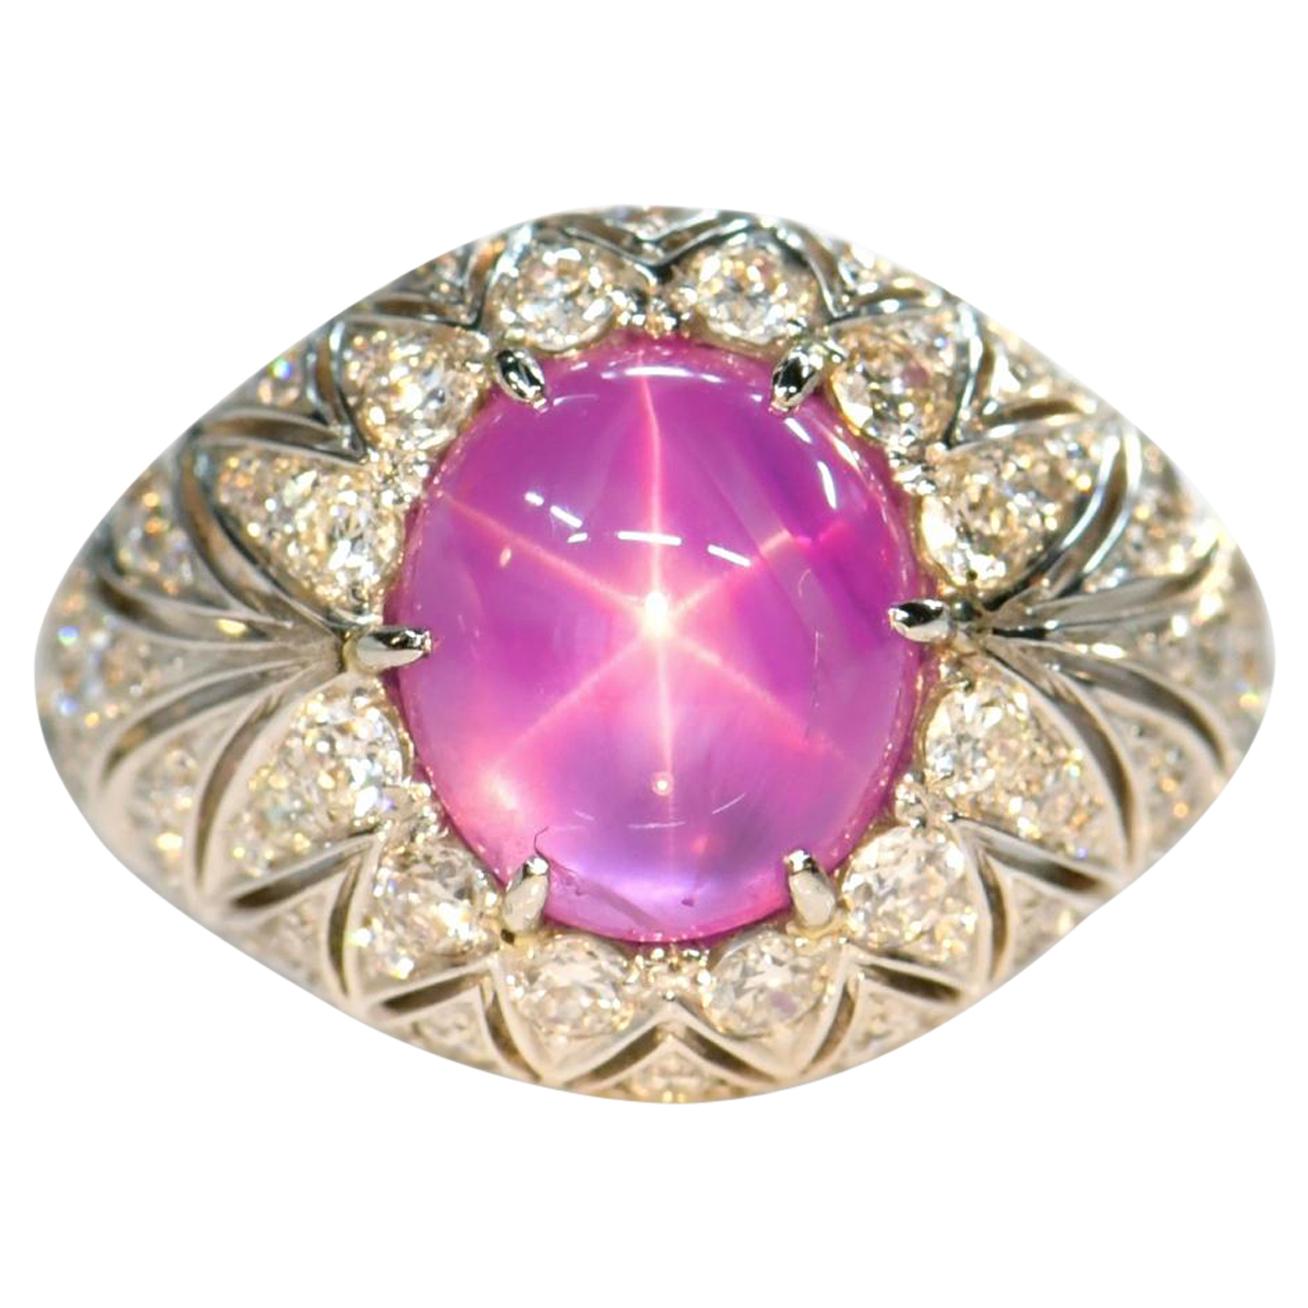 Pink Star Sapphire Diamond Ring For Sale